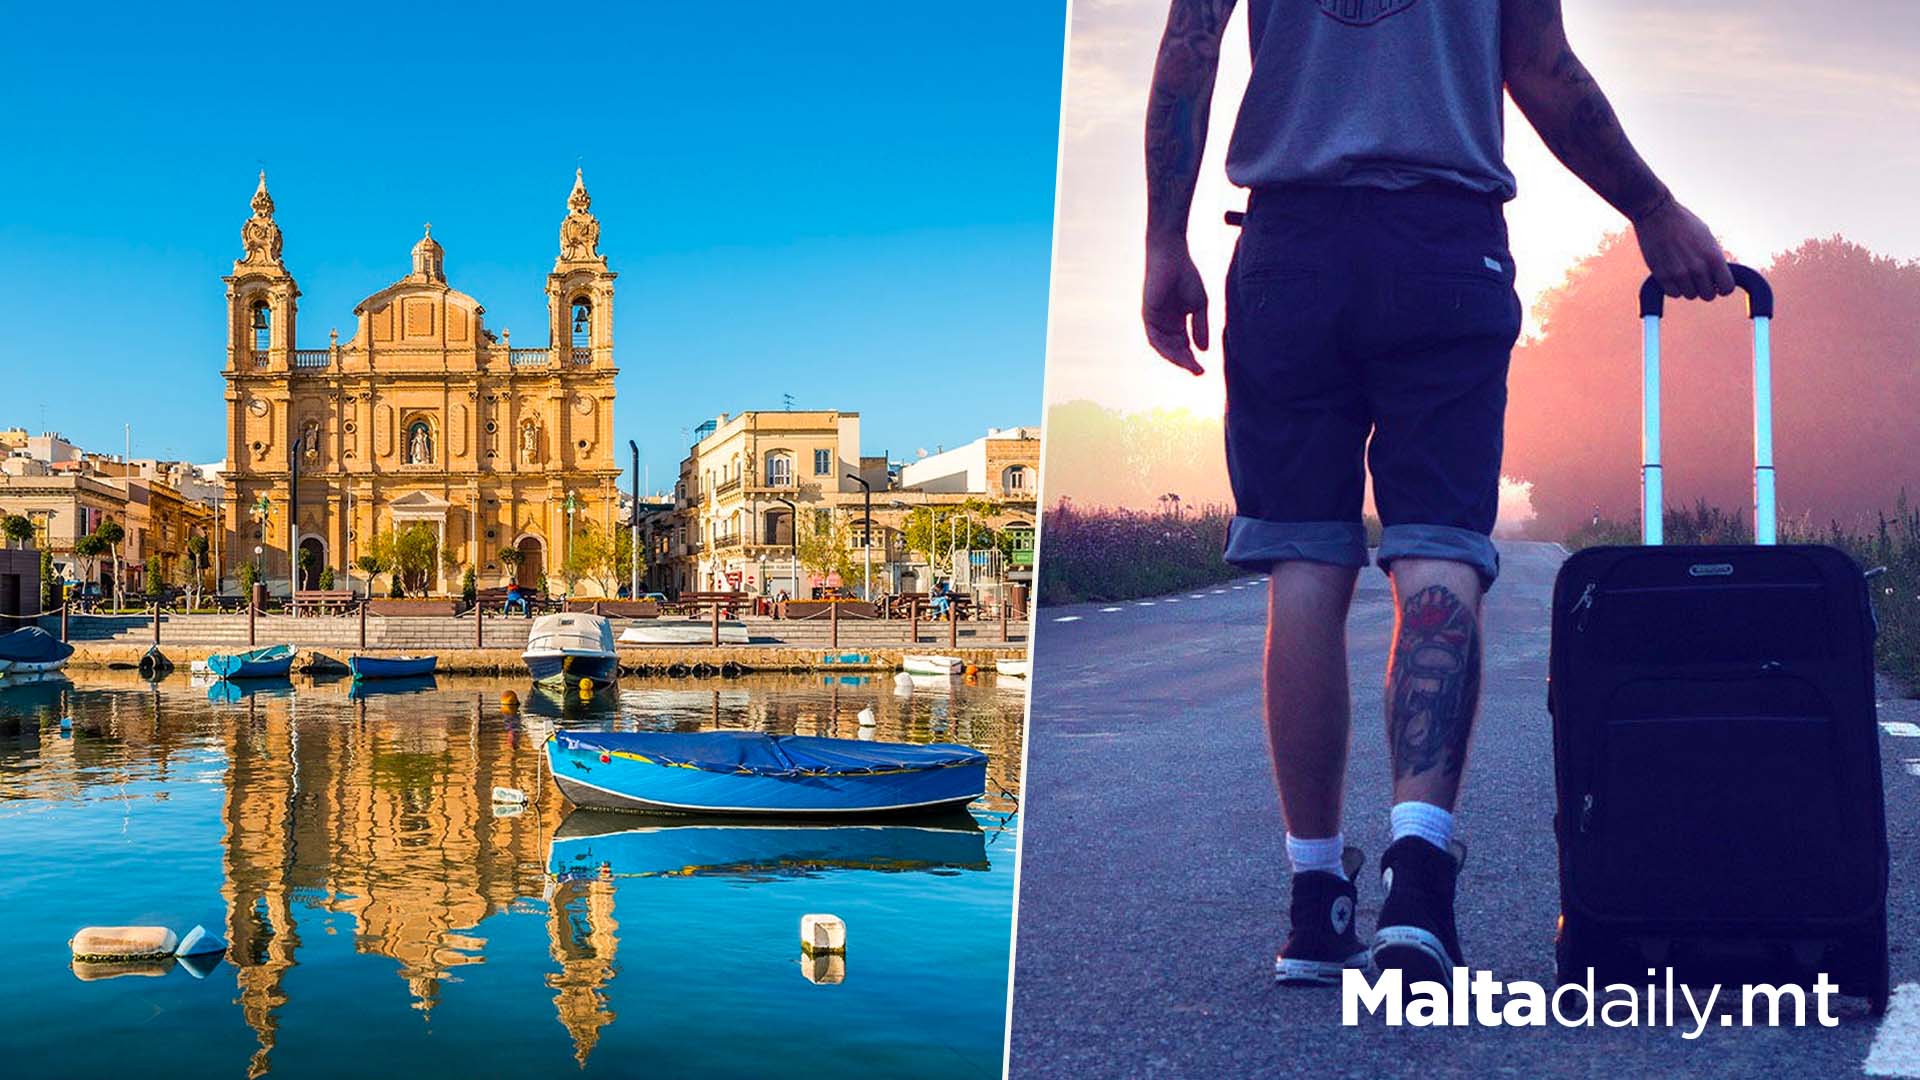 What Makes People Want To Leave Or Stay In Malta?